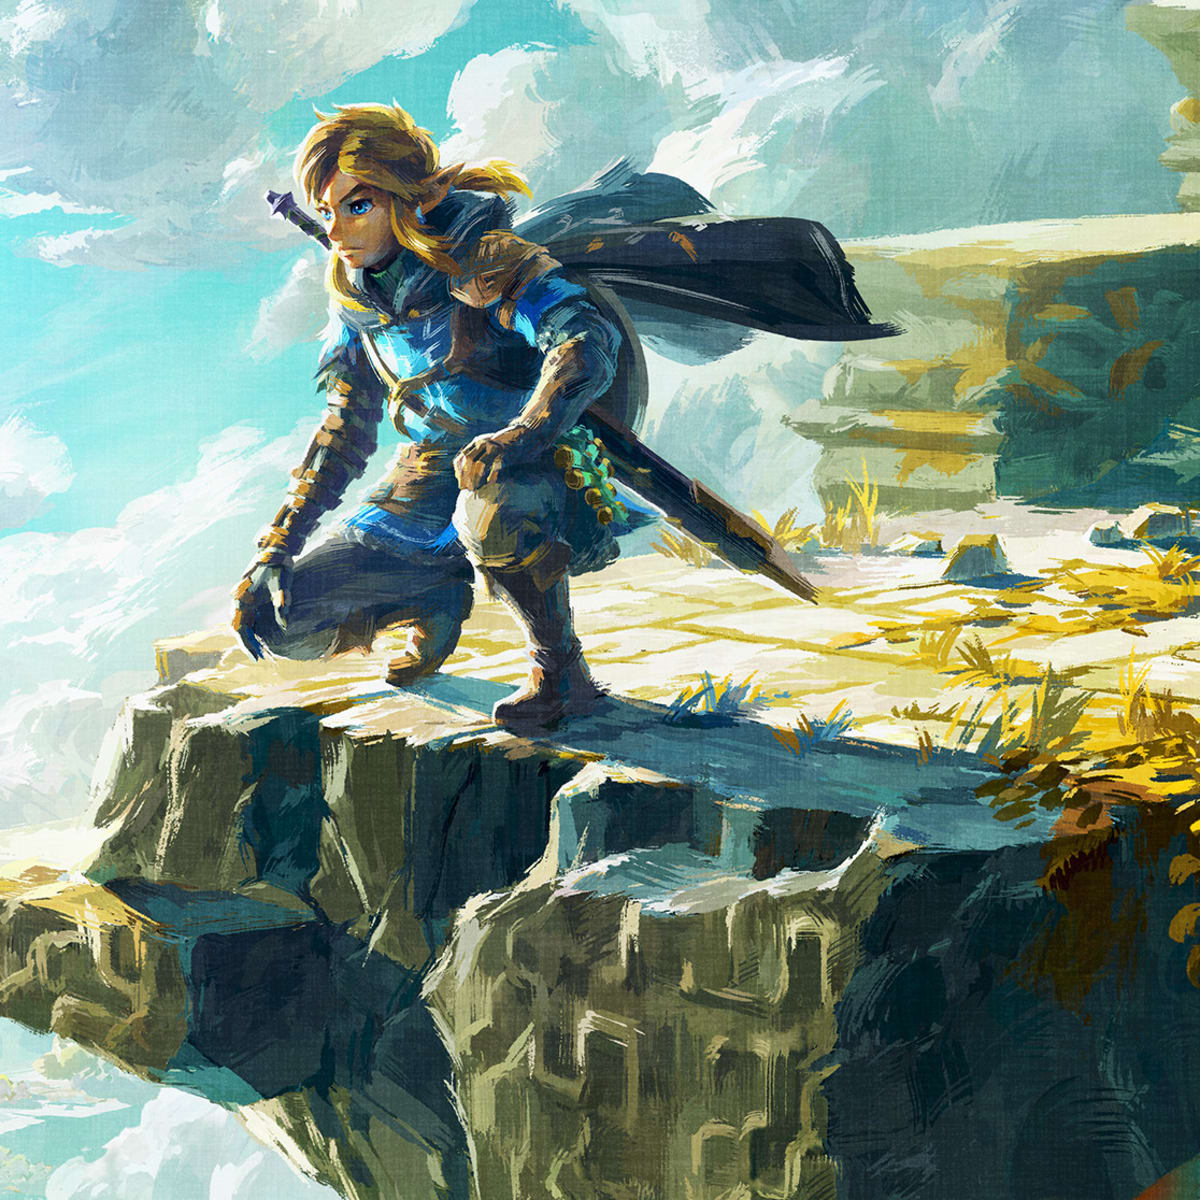 Best Zelda Games, Ranked - Where Does Tears Of The Kingdom Fall